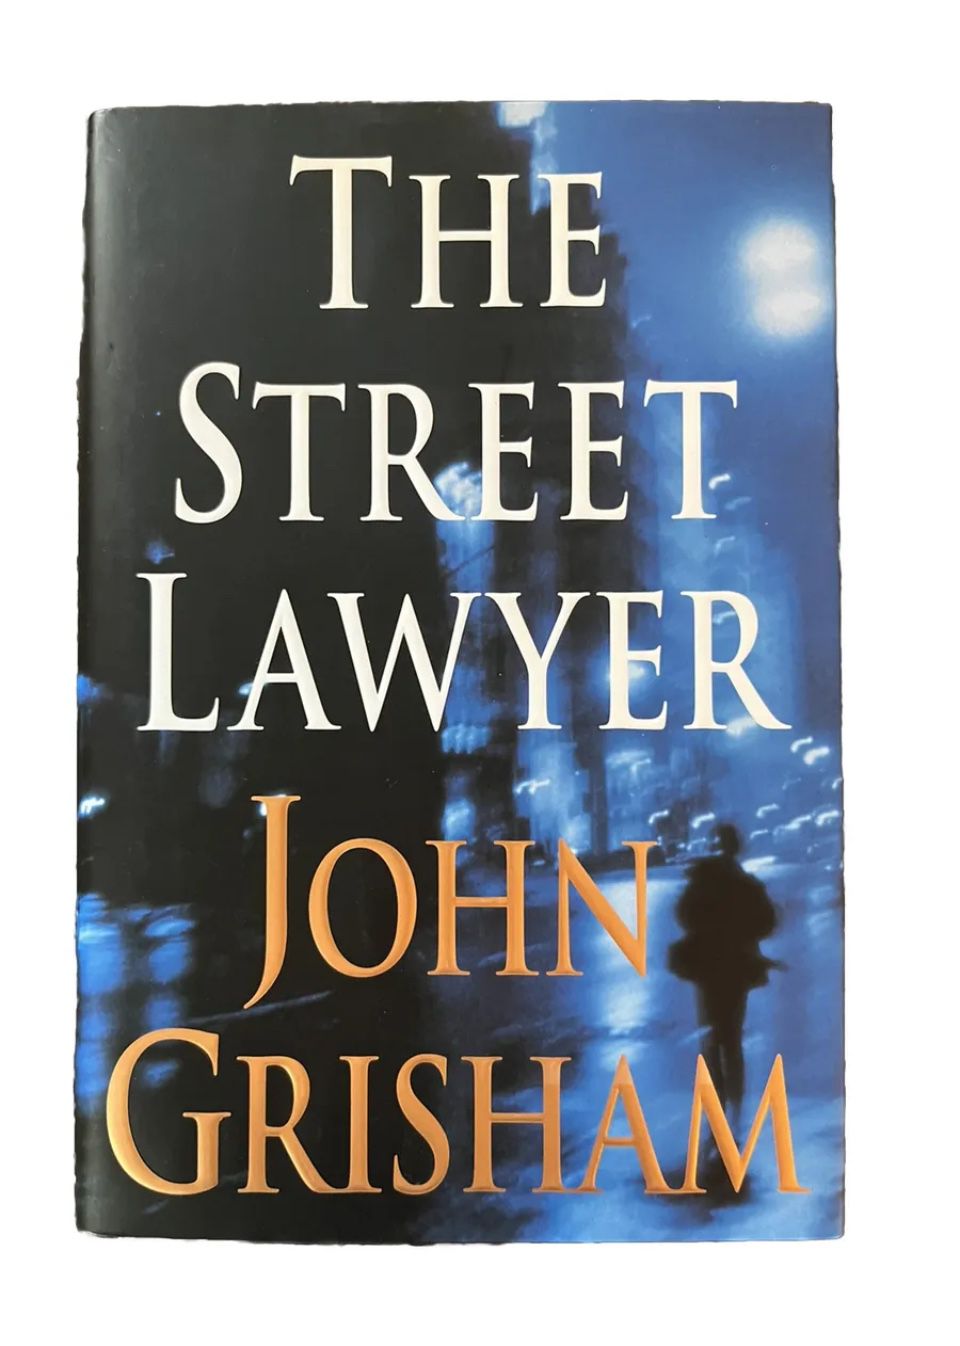 "The Street Lawyer" by John Grisham (1998) Hardcover First Edition Book Novel